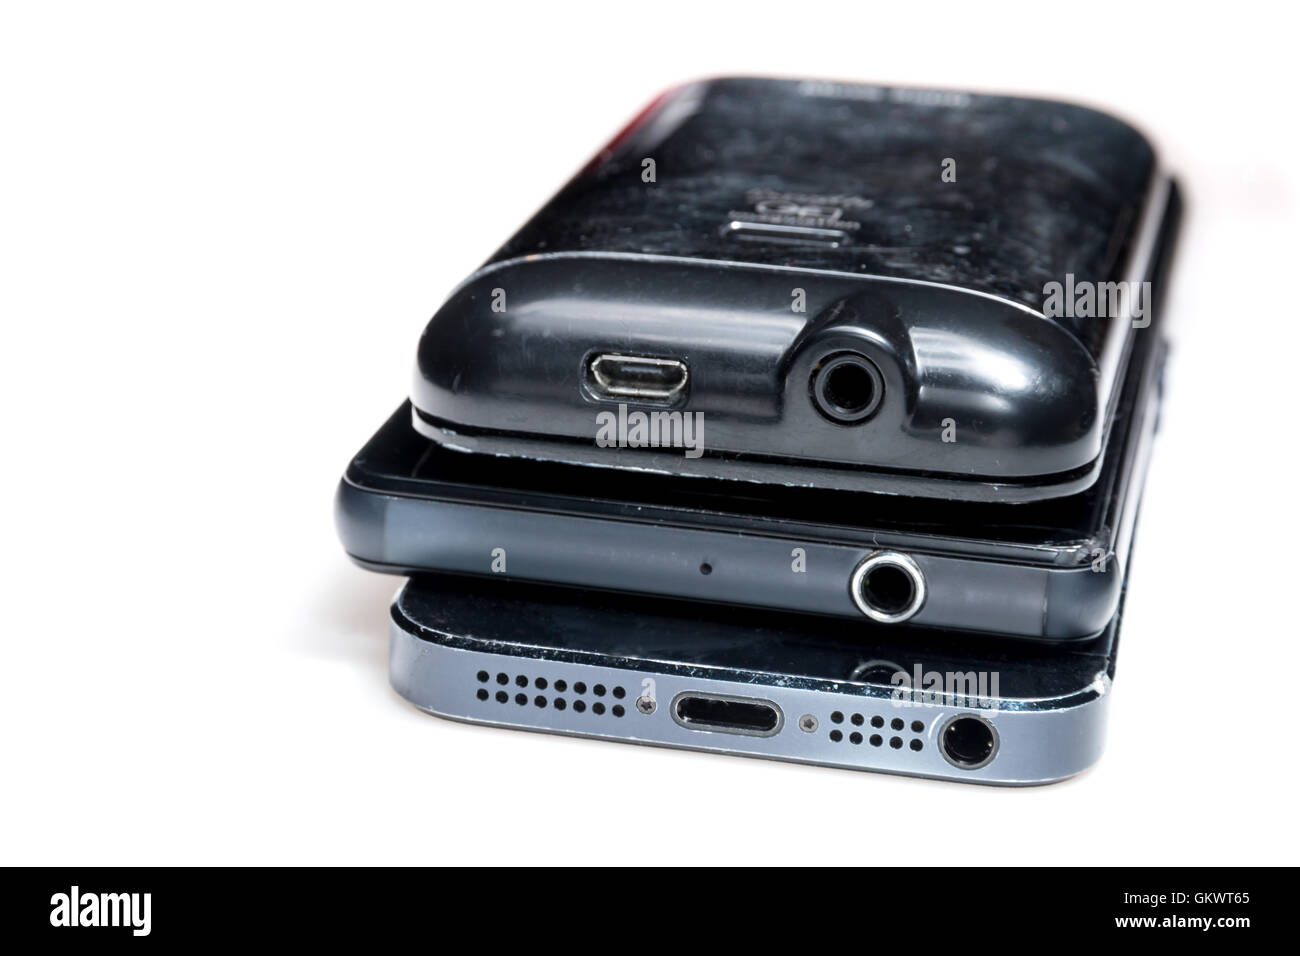 Stack of an android smartphone, iphone and portable radio showing their headphone sockets. Stock Photo